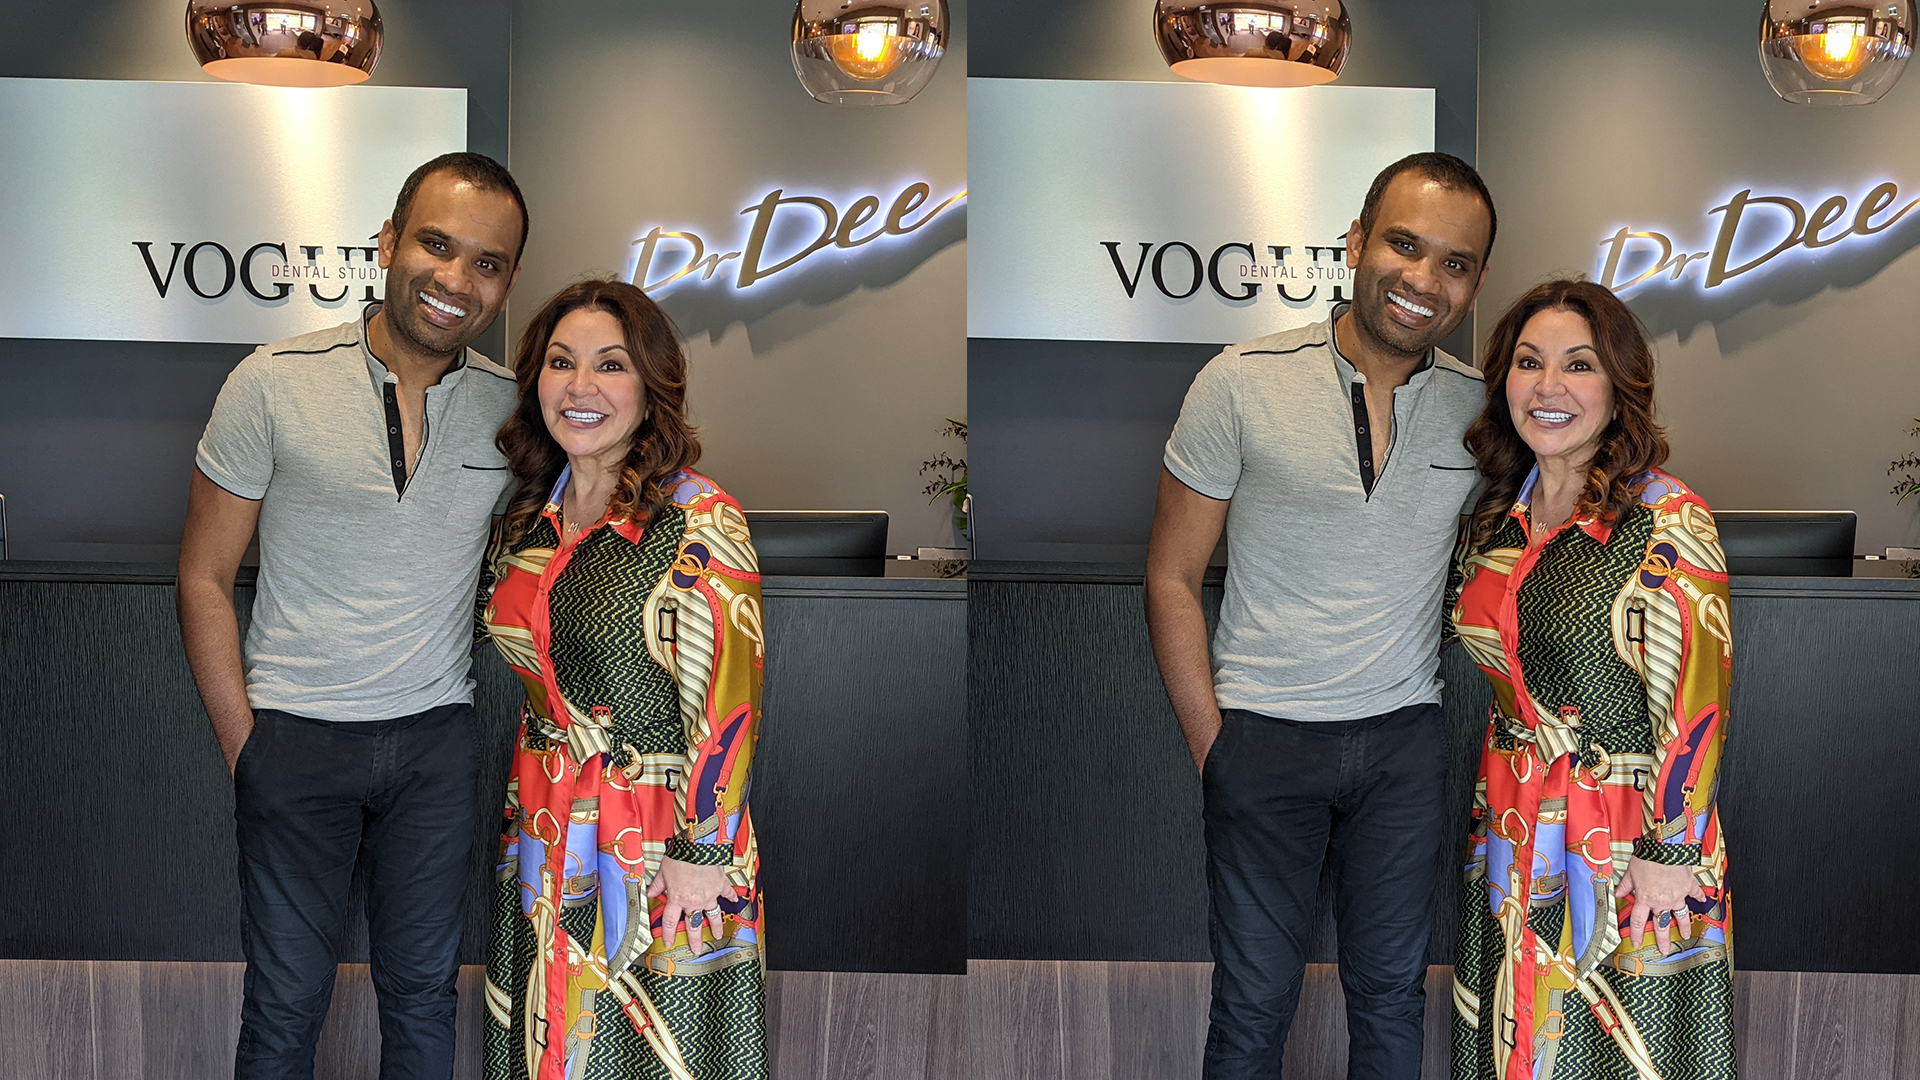 Mary and Dr Dee at Vogue Dental Studios.